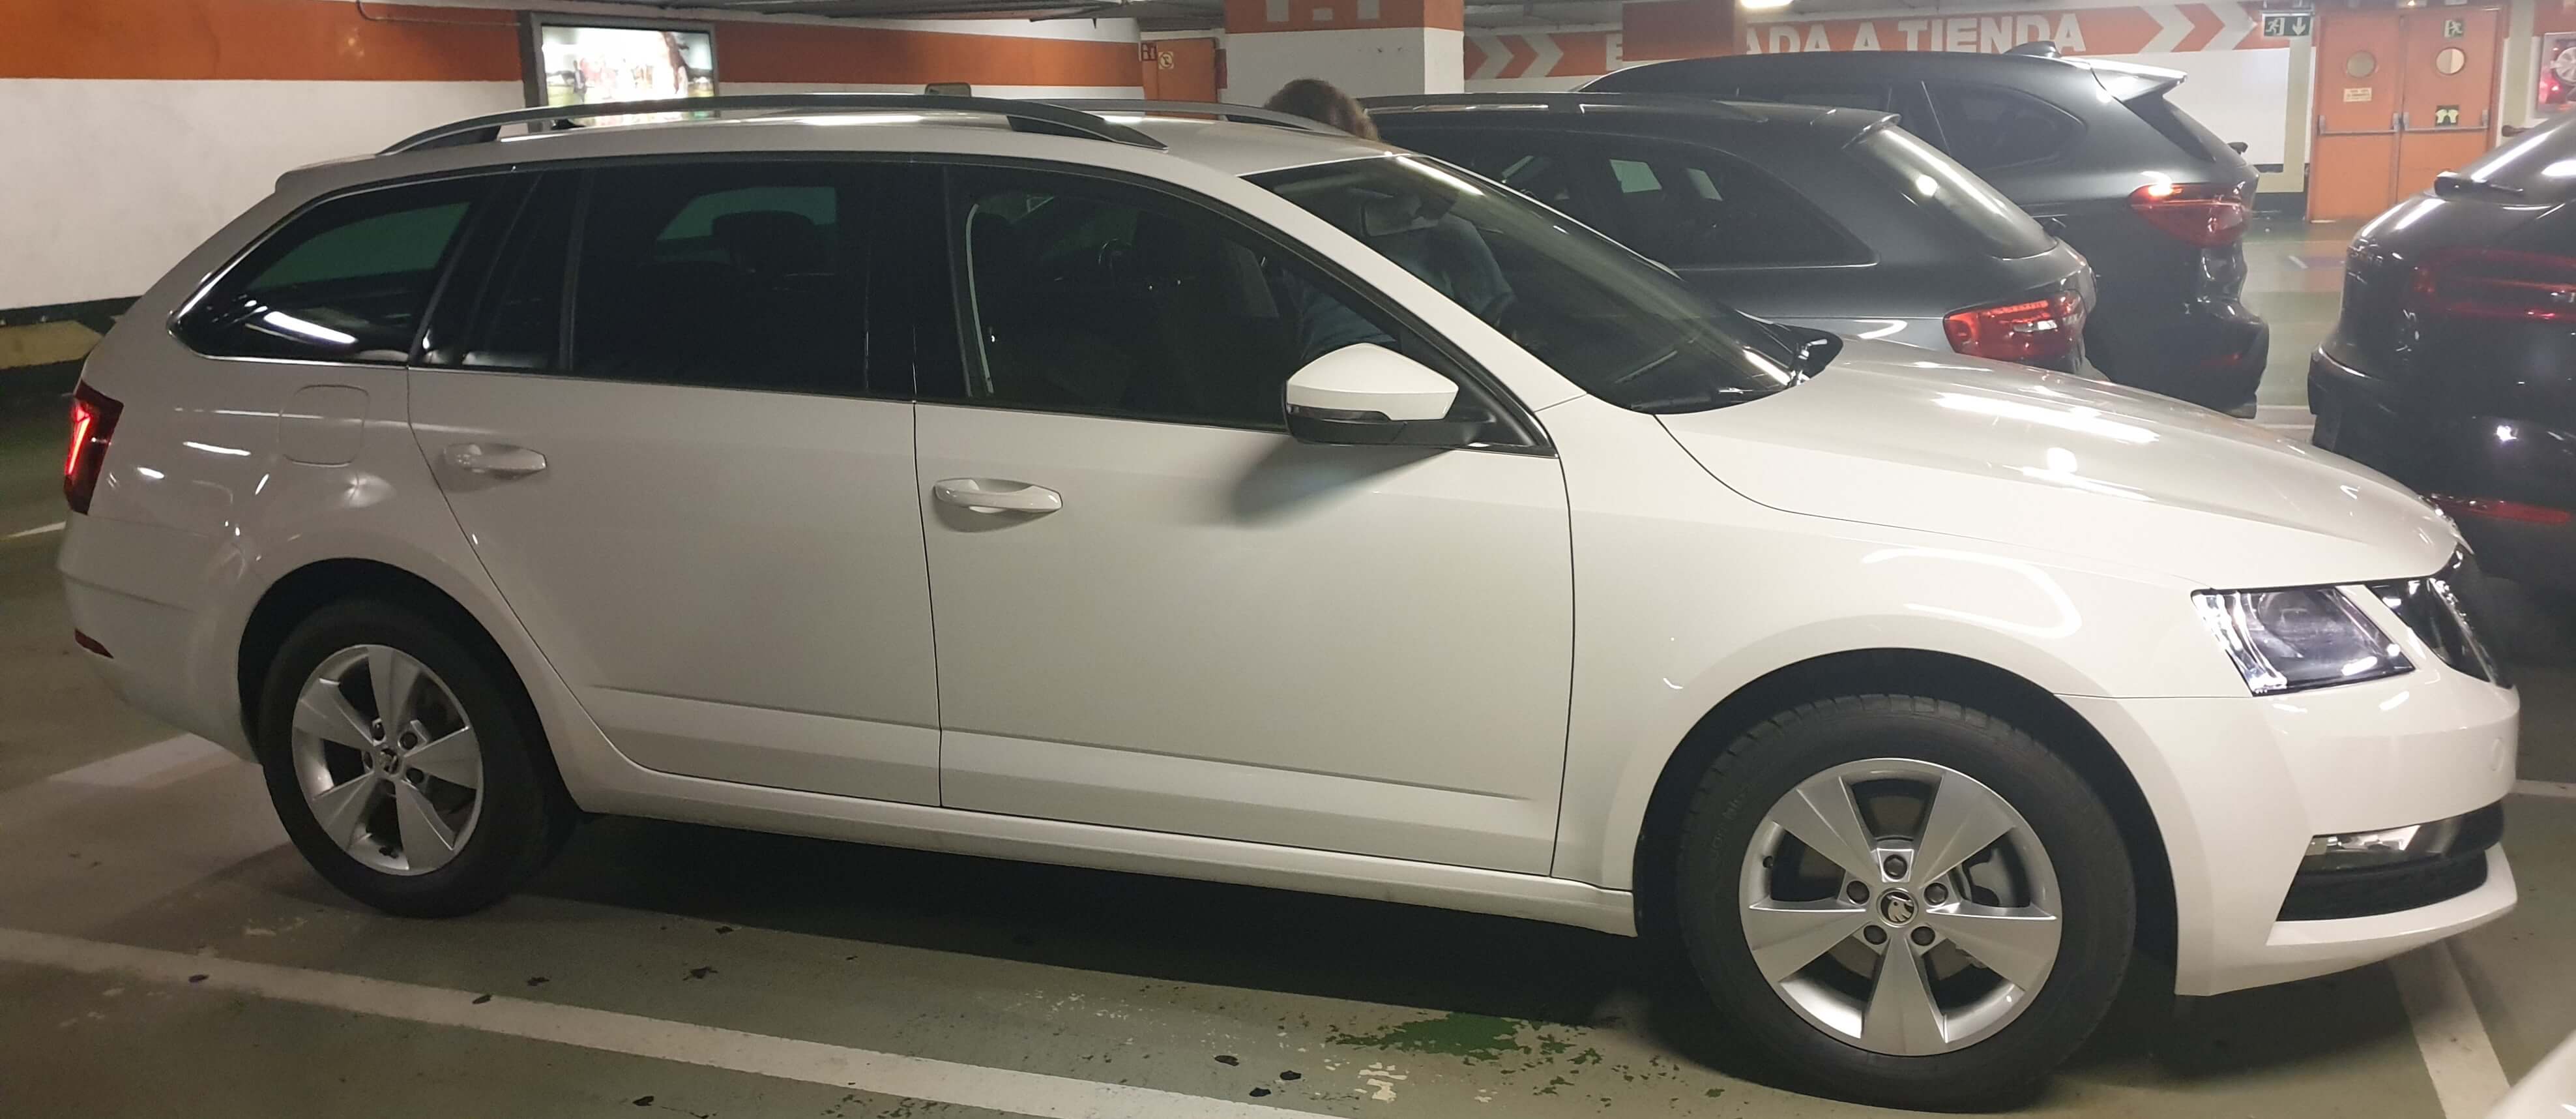 Rent a 5 seater Car with driver (Skoda Octavia combi 2020) from TAXIS YUS NIN from El Llor 